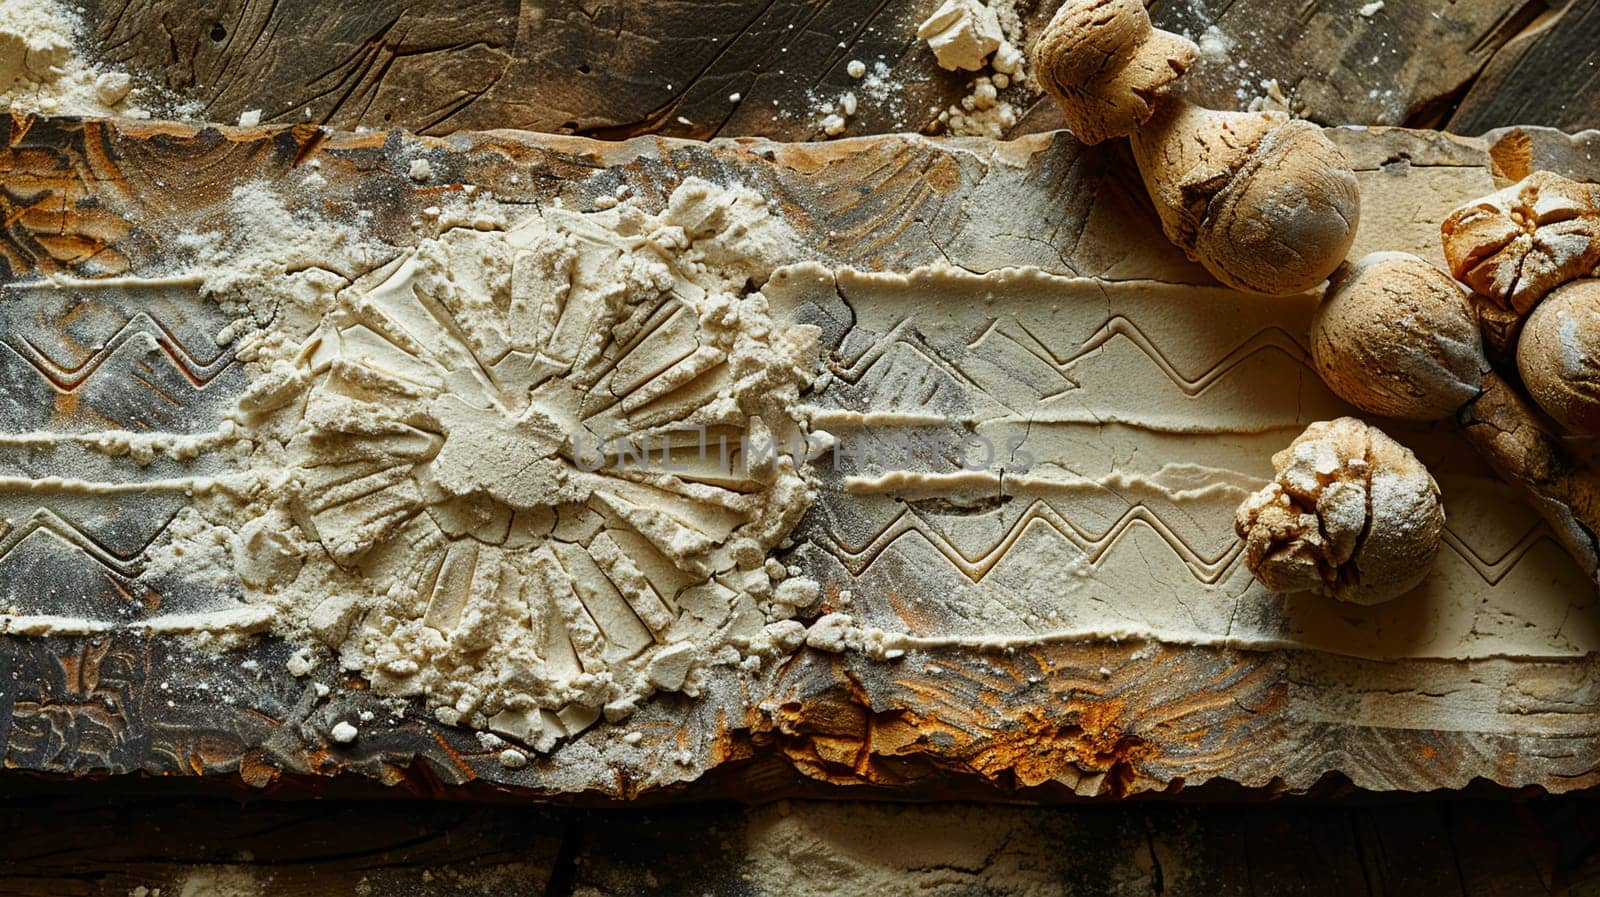 Vodou Veve Symbols Drawn in Flour for a Ceremony, The intricate lines spread out, carrying the power of connection to the divine.